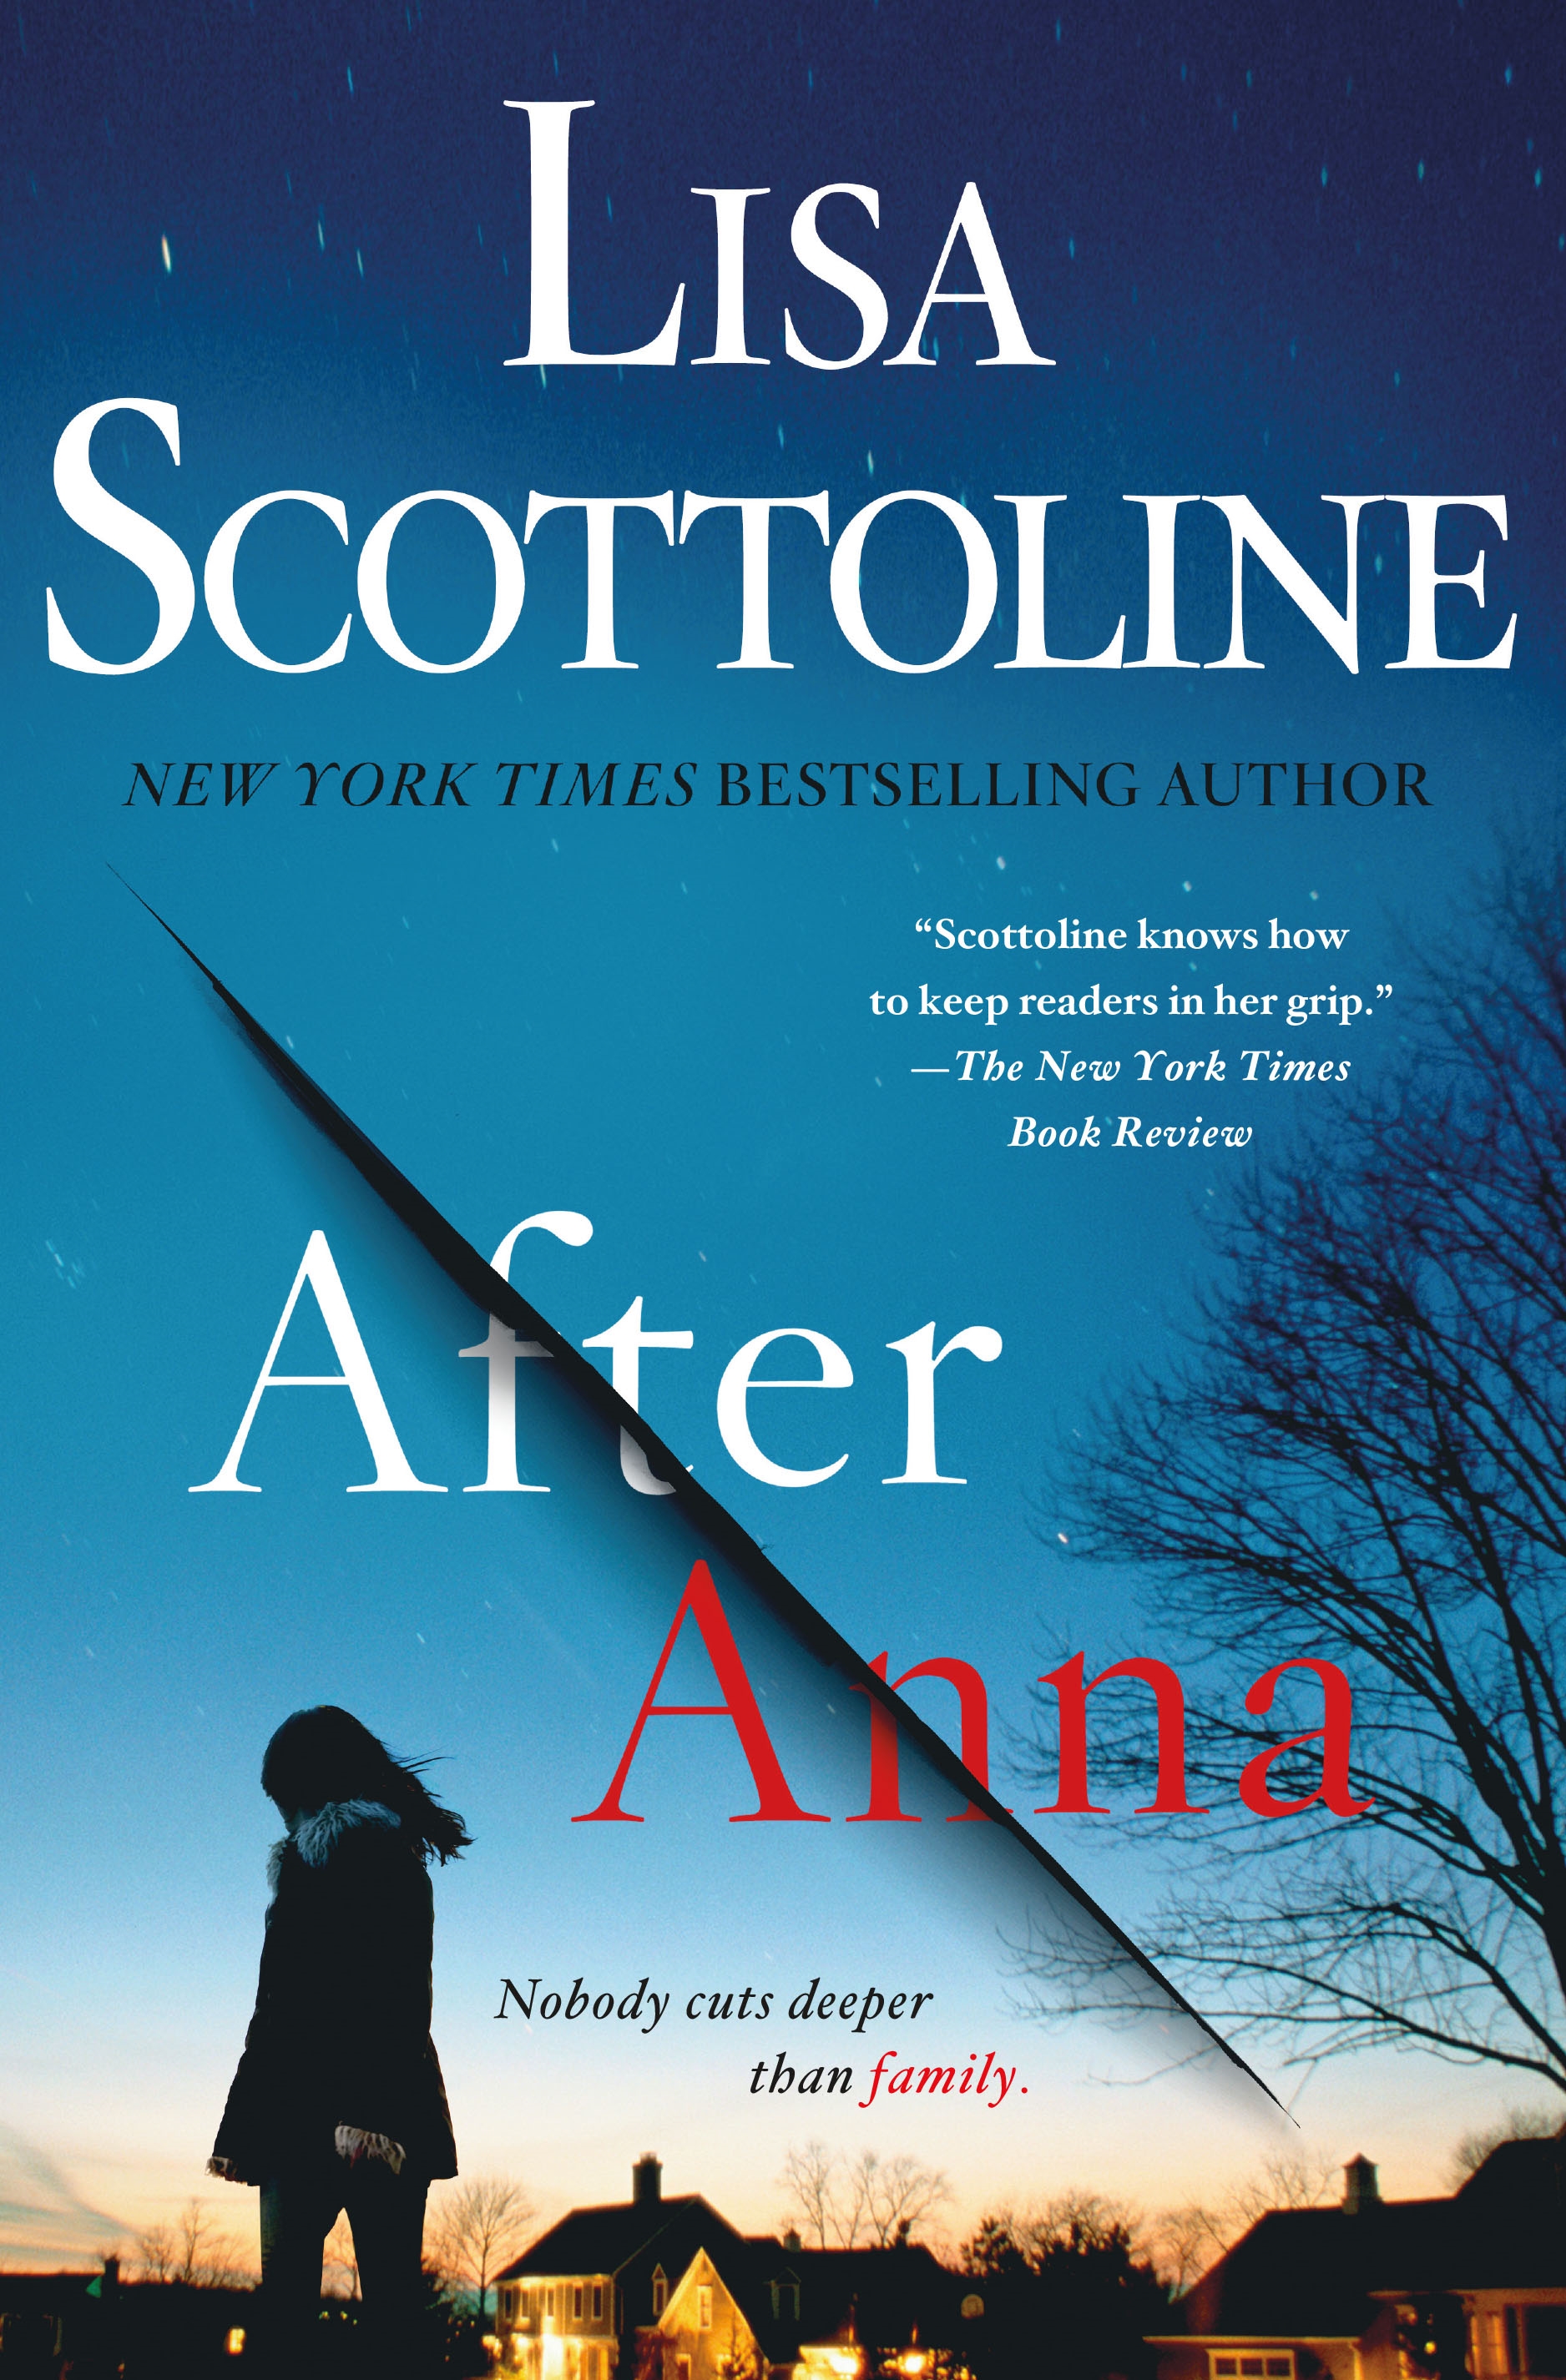 Book “After Anna” by Lisa Scottoline — April 10, 2018